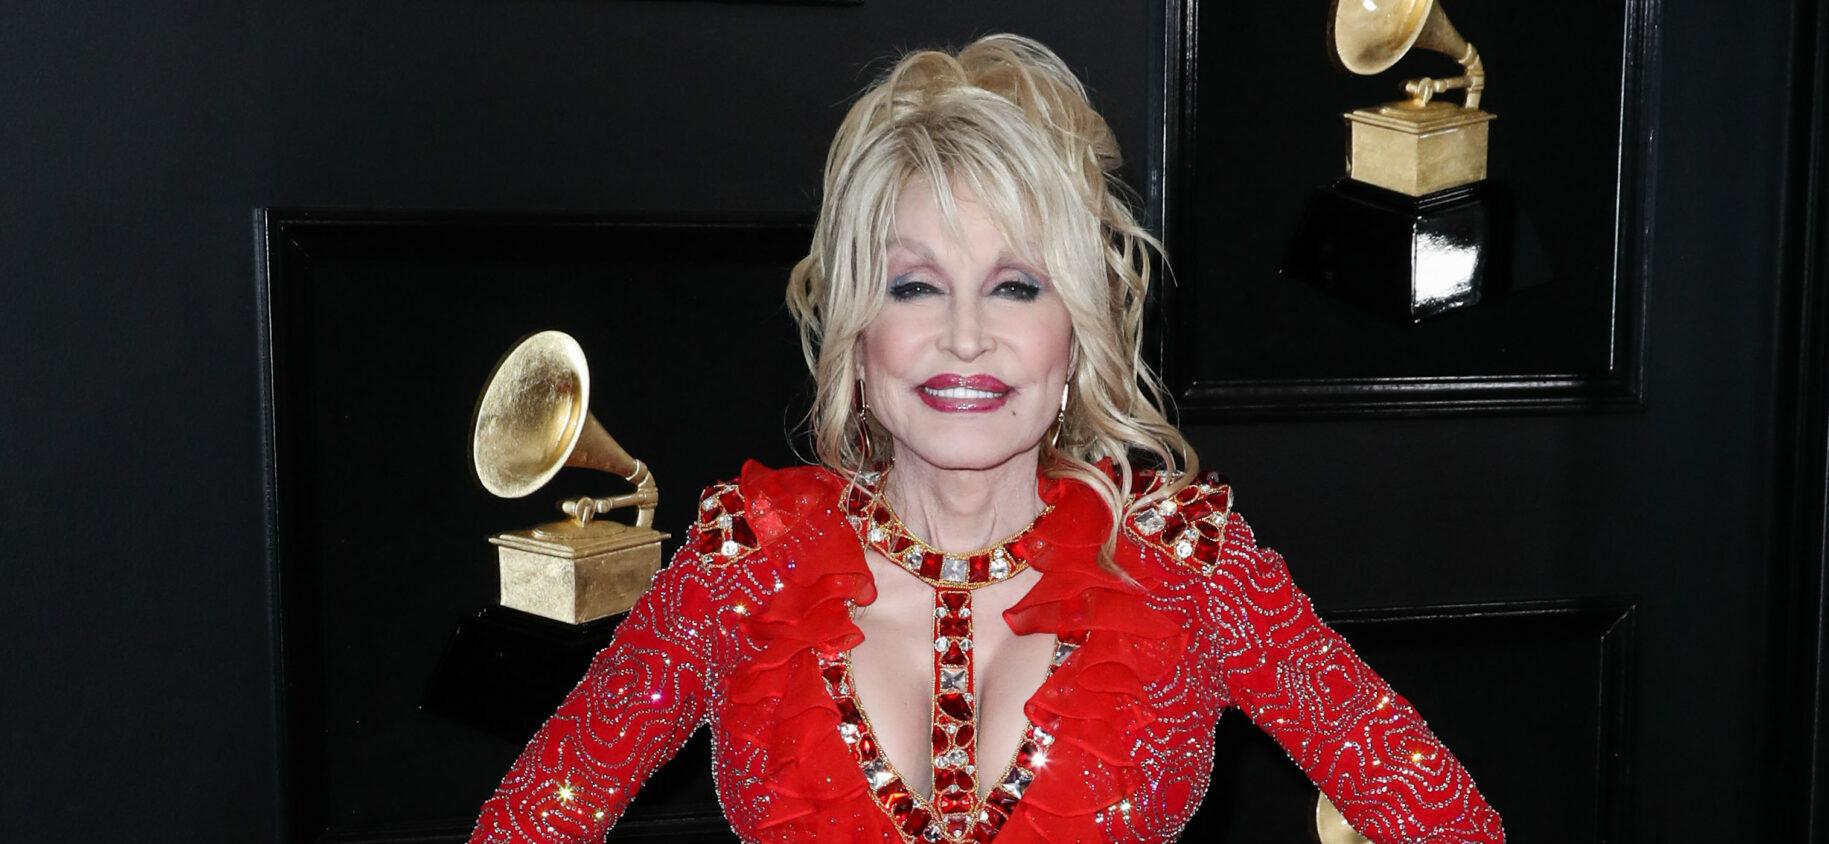 Dolly Parton at the 61st Annual GRAMMY Awards